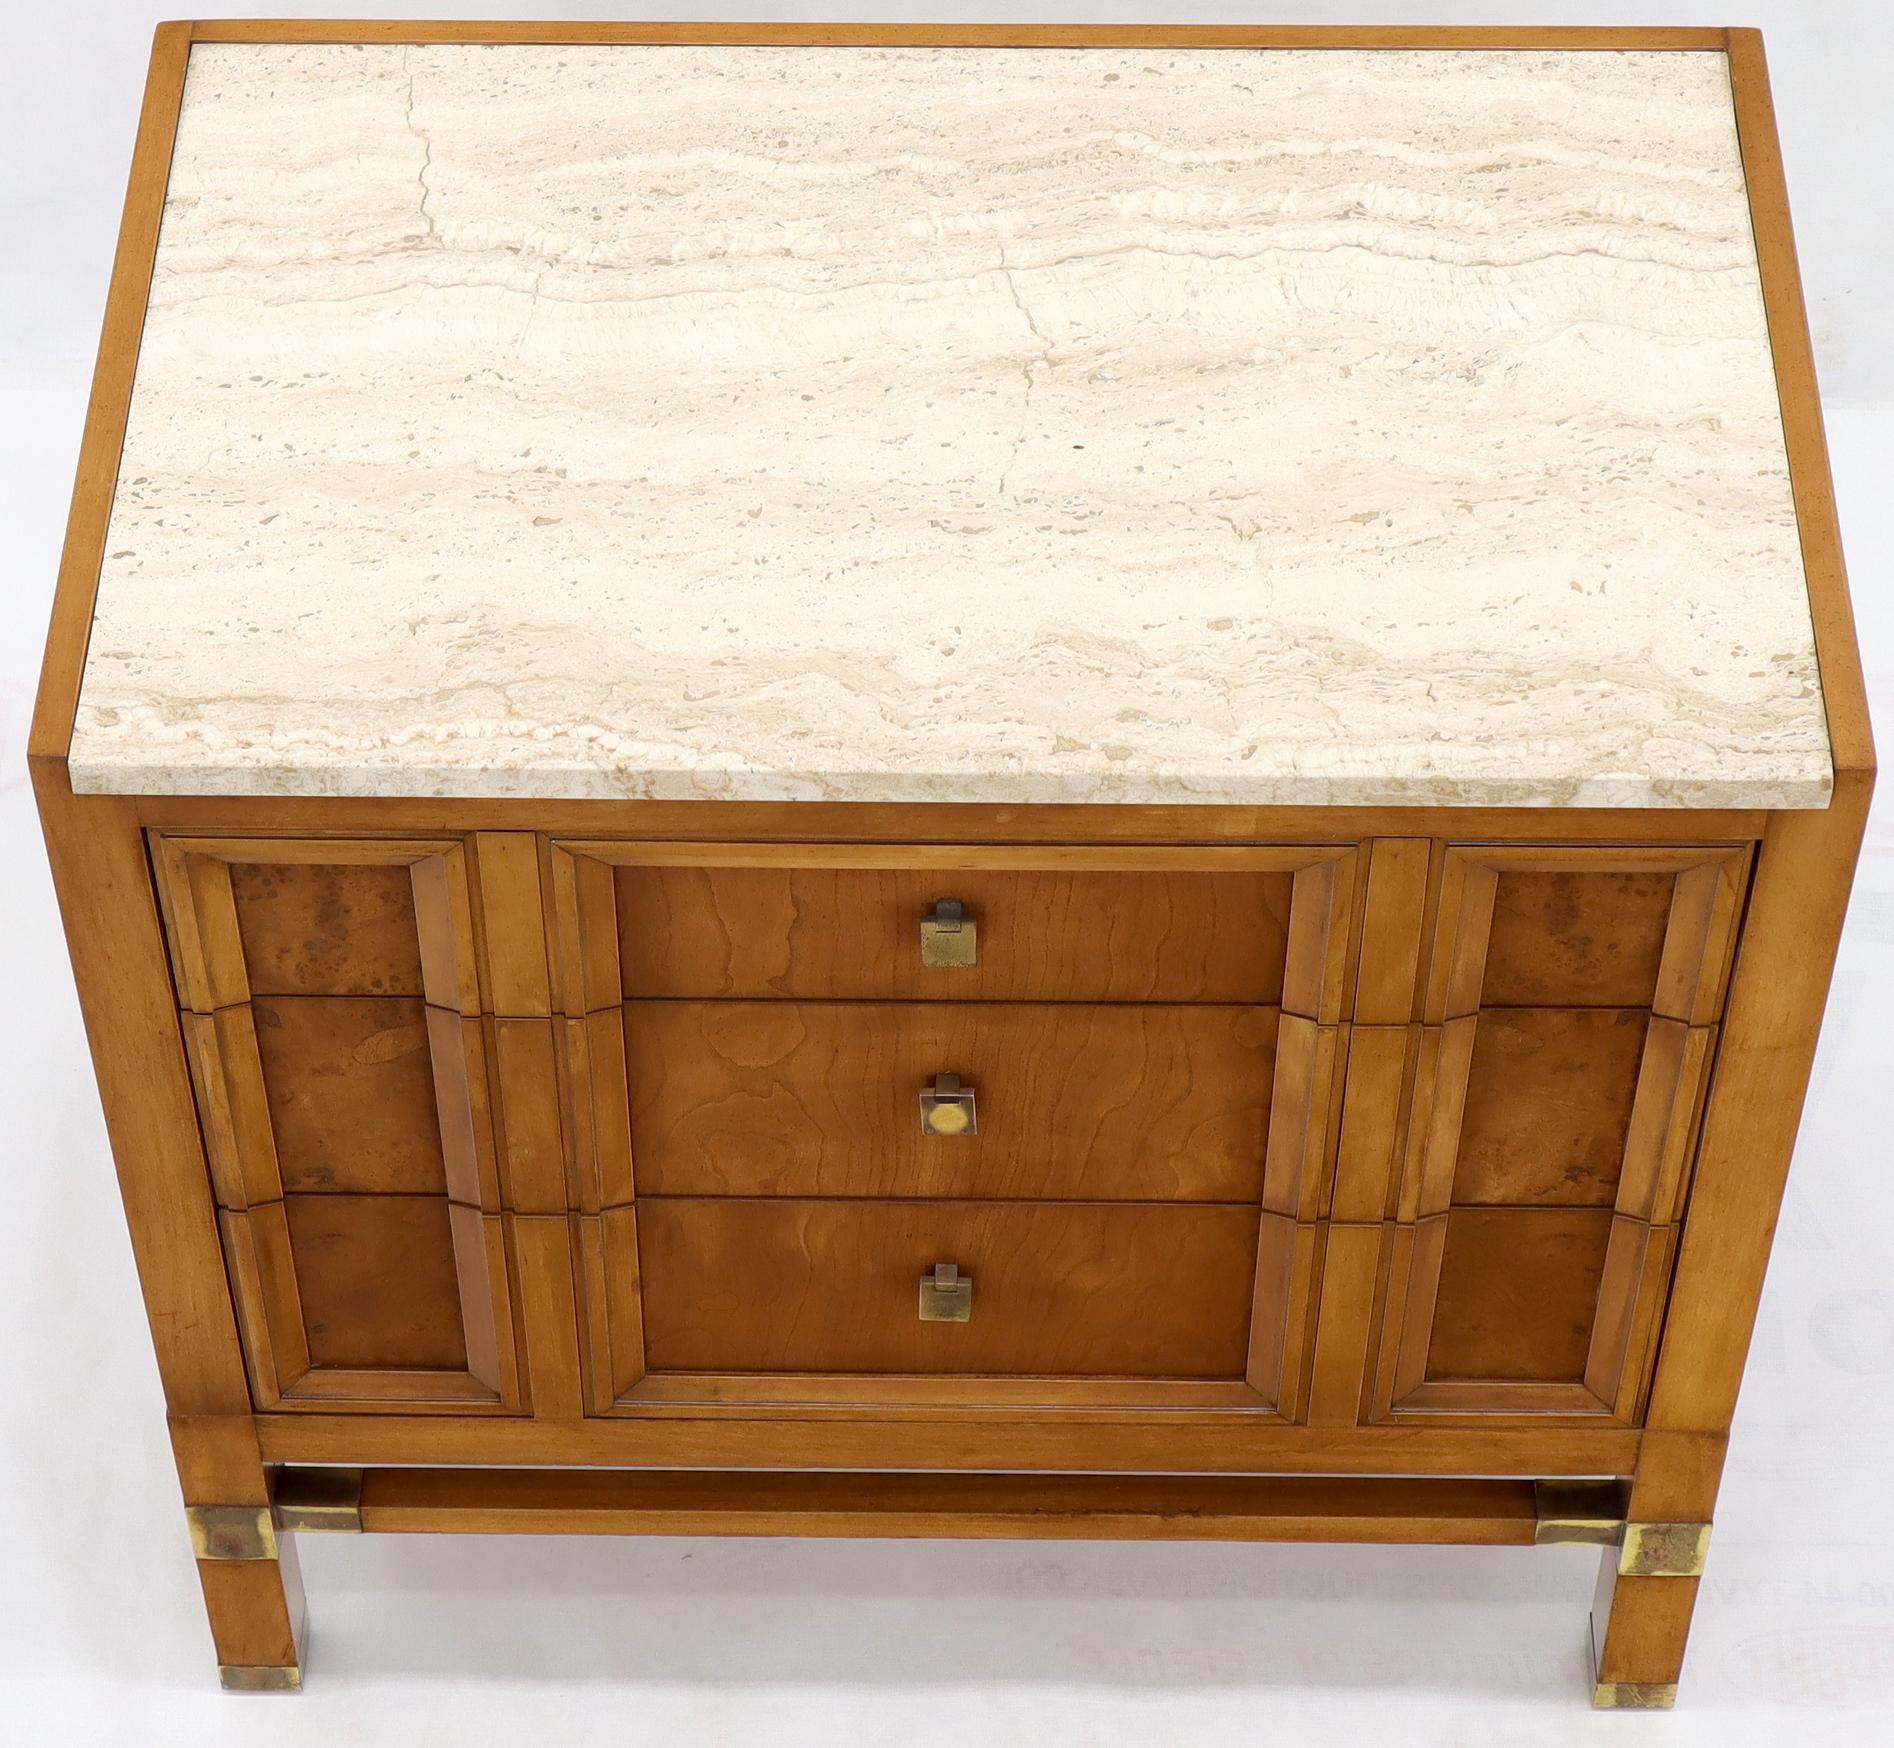 Travertine Top Three Drawers Bachelors Chest with Brass Pulls and Accents In Good Condition For Sale In Rockaway, NJ